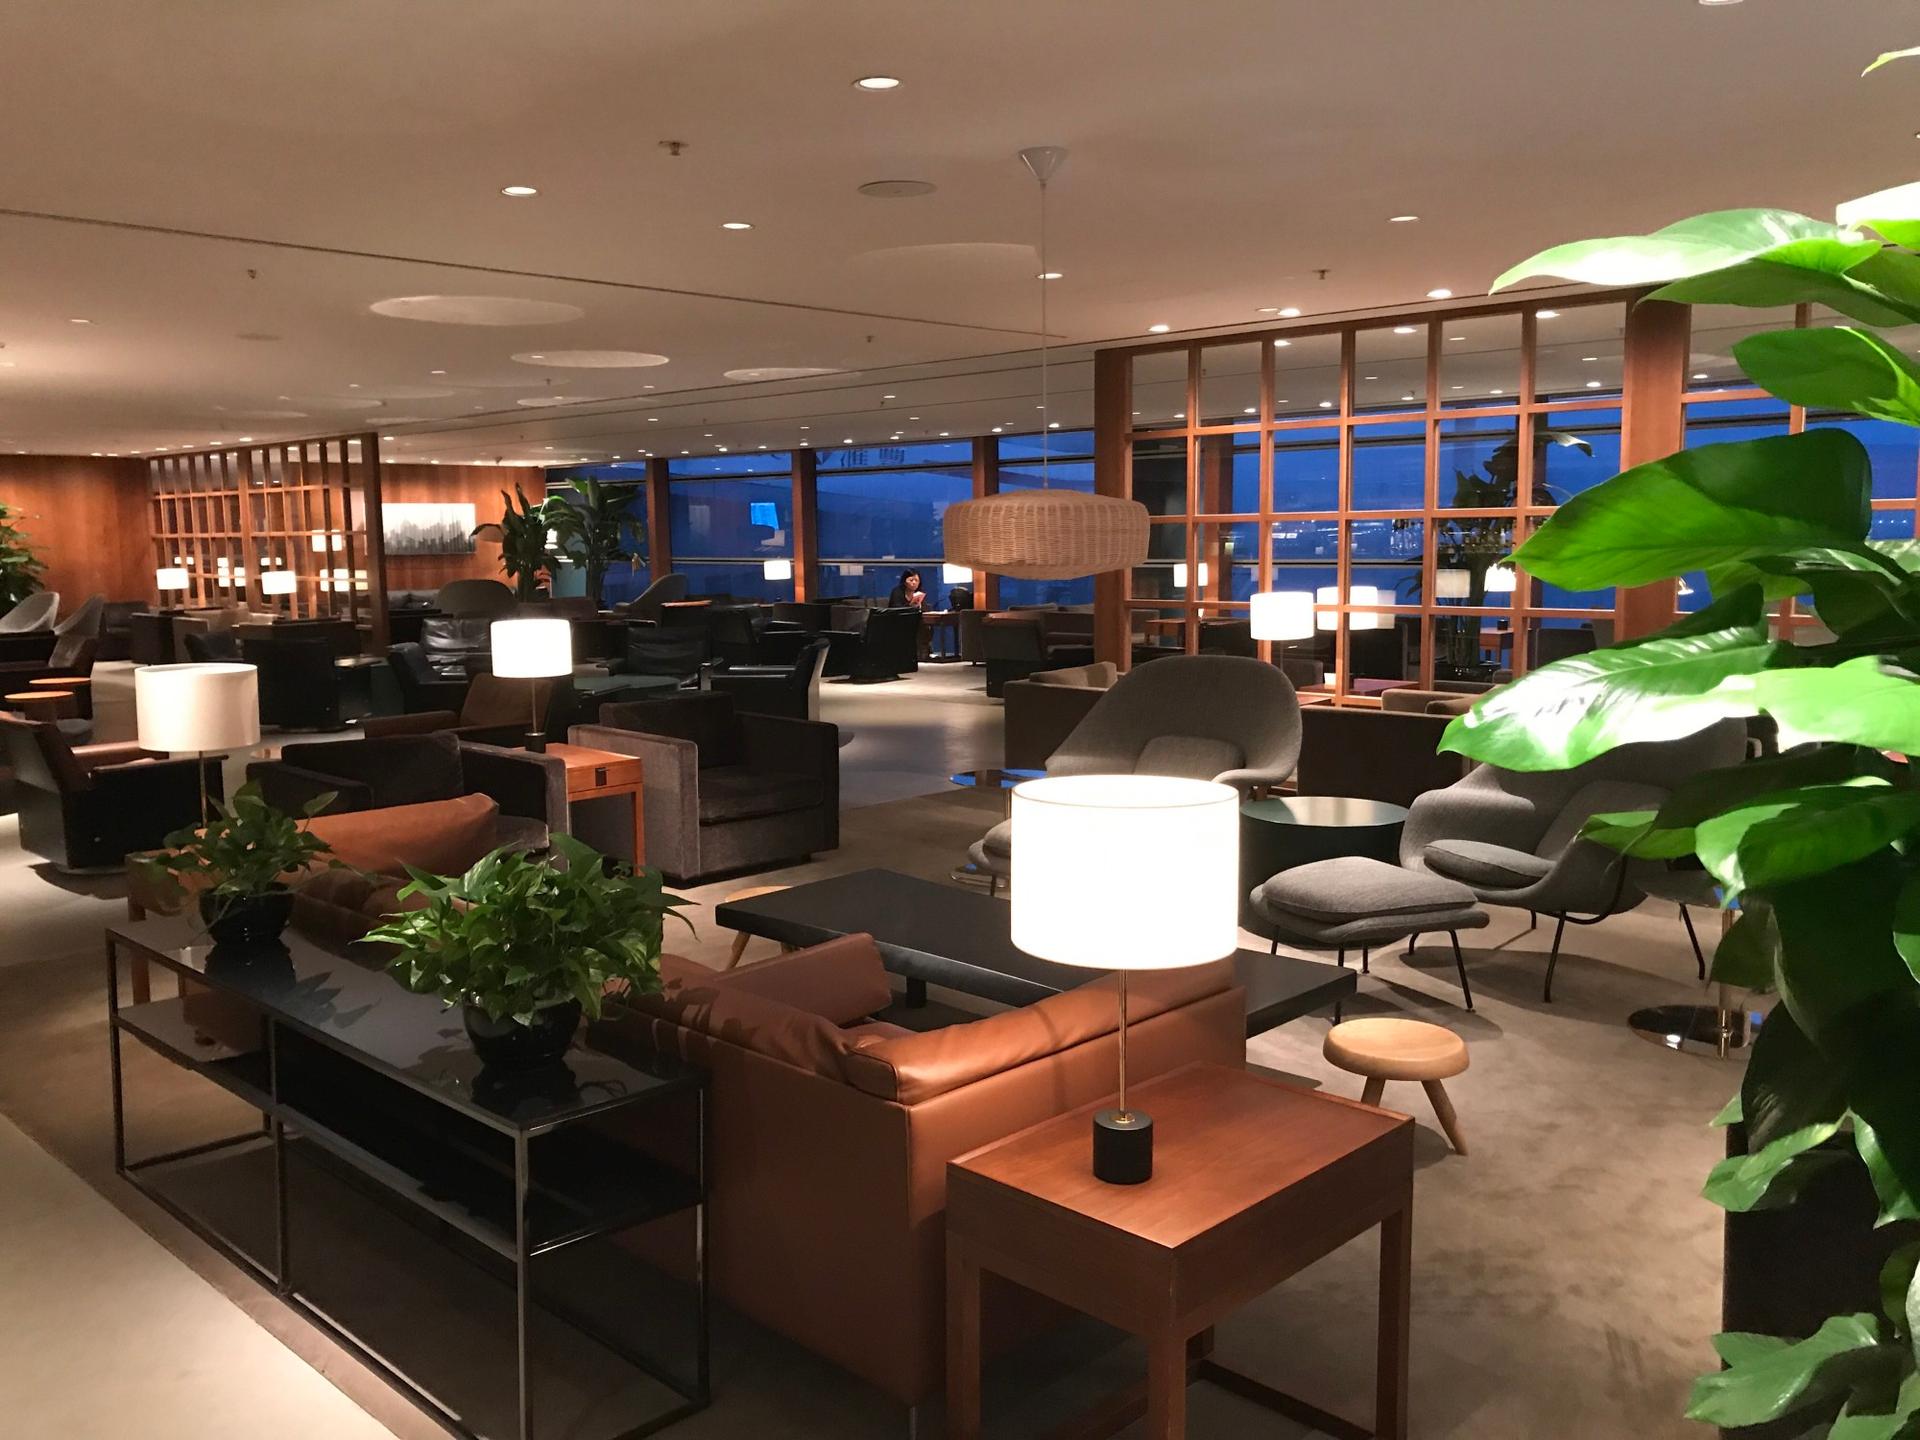 Cathay Pacific The Pier Business Class Lounge image 45 of 61